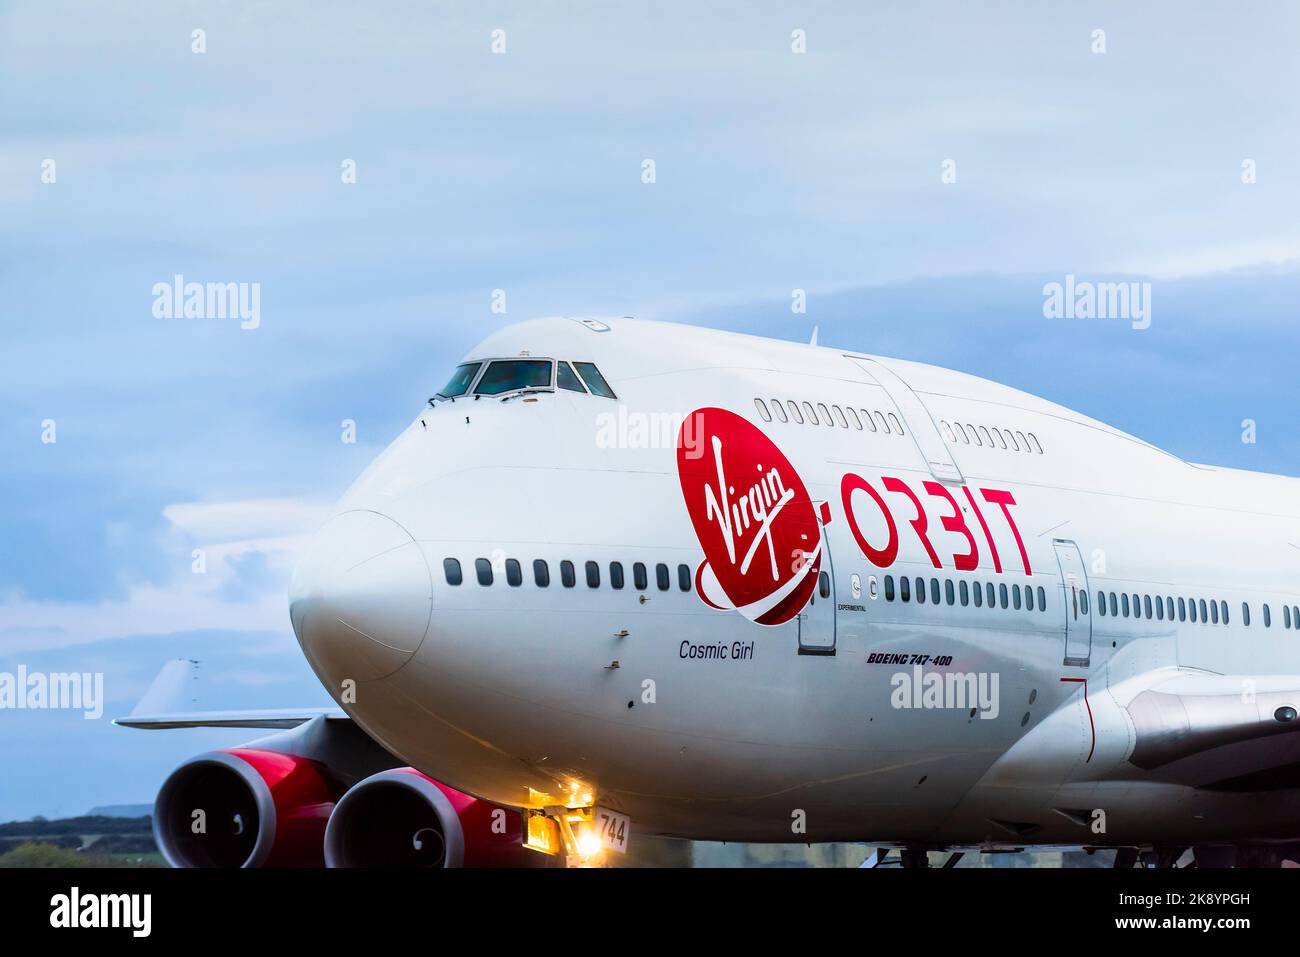 A closeup close up view of the company logo and livery on the Virgin Orbit, Cosmic Girl, a 747-400 converted to a rocket launch platform taxiing to a Stock Photo